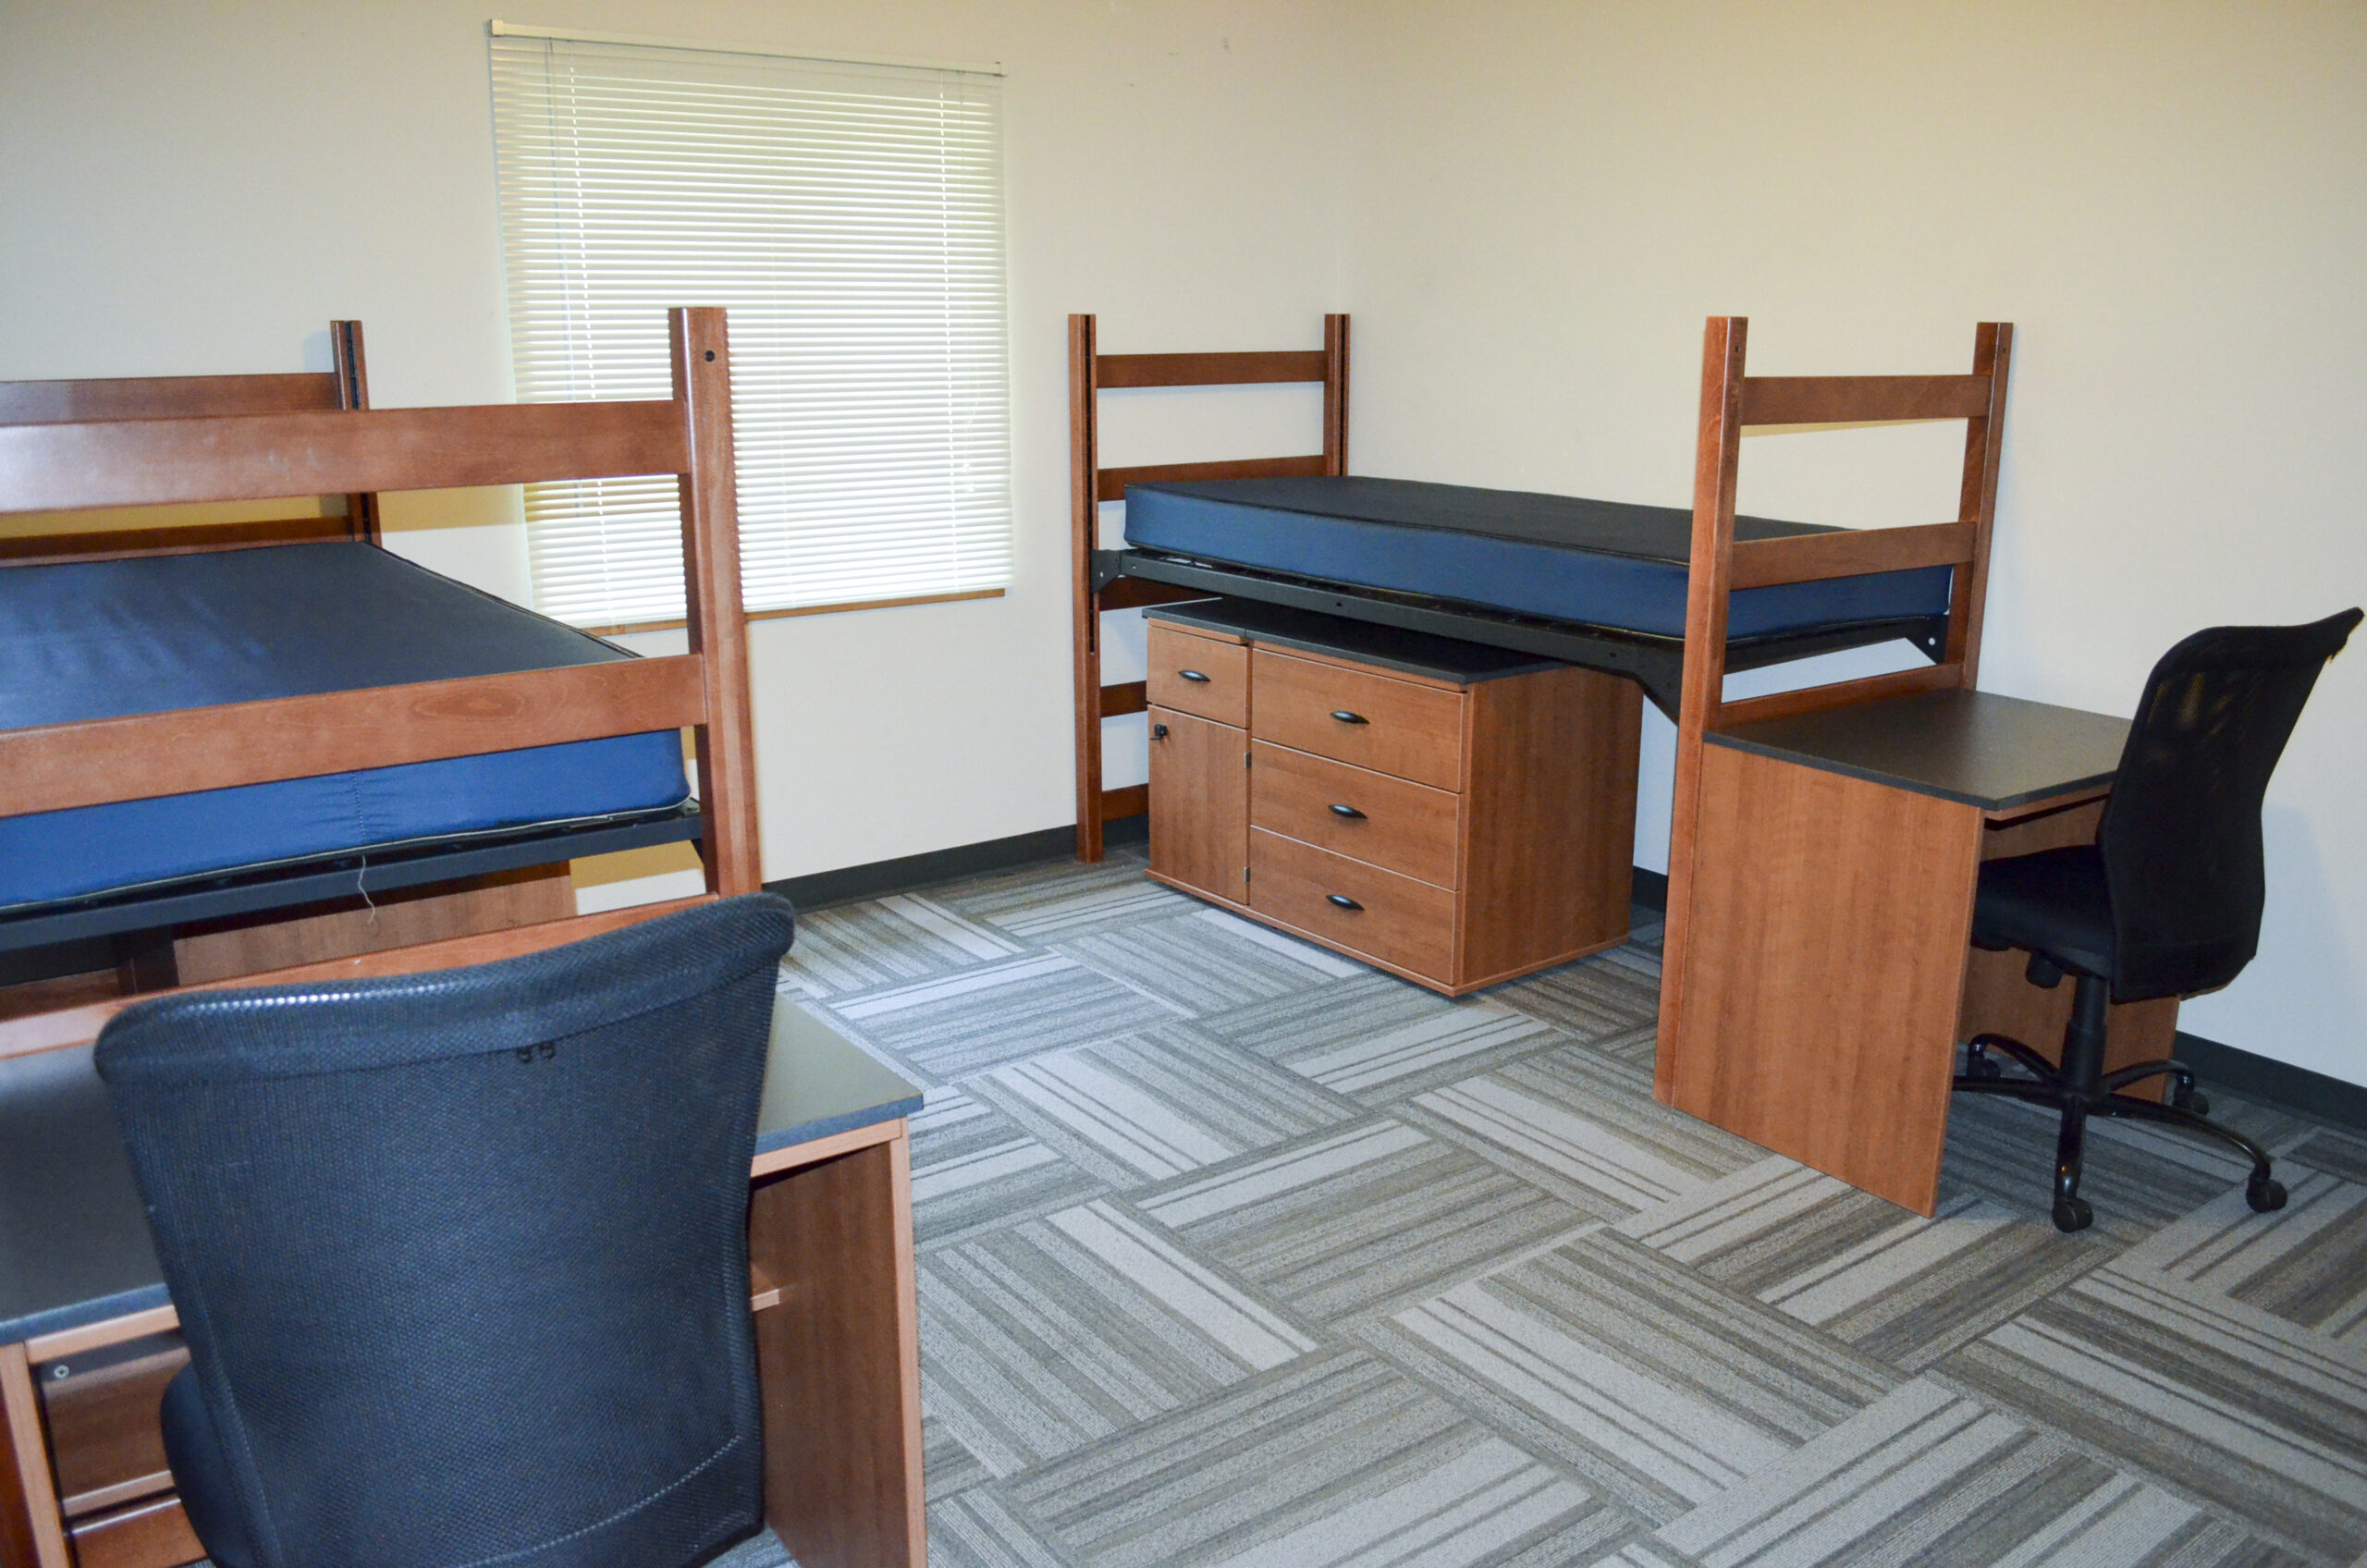 Jefferson Suites - UNCG Housing and Residence Life